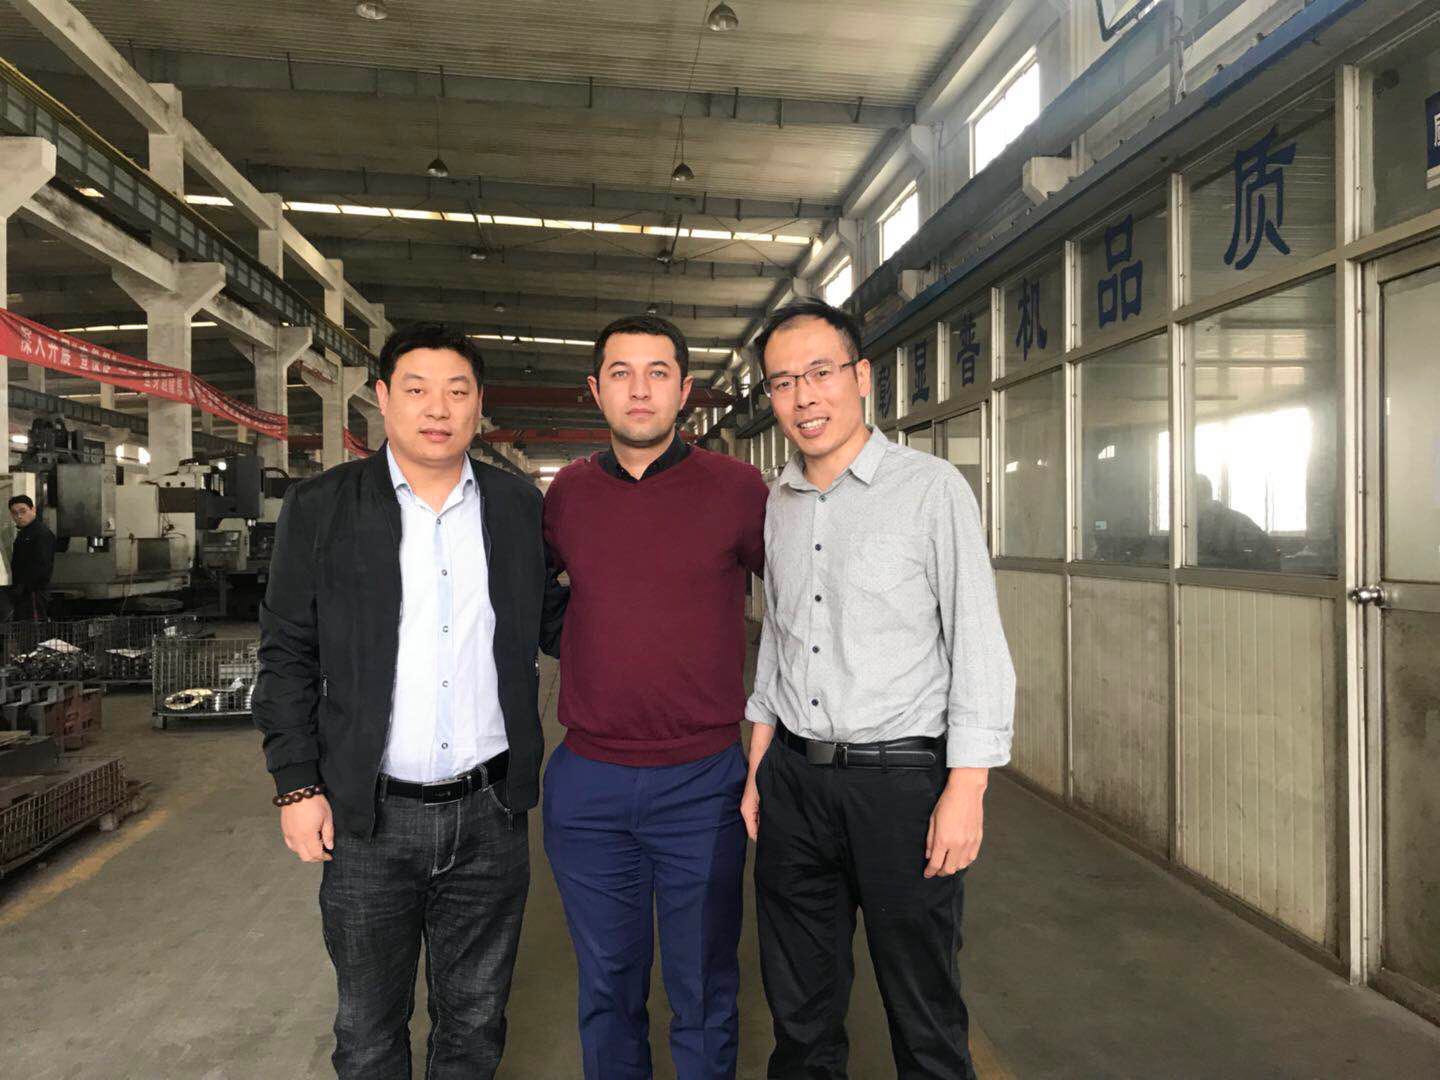 Iranian customers came to visit and inspect lathes and milling machines, and successfully signed orders